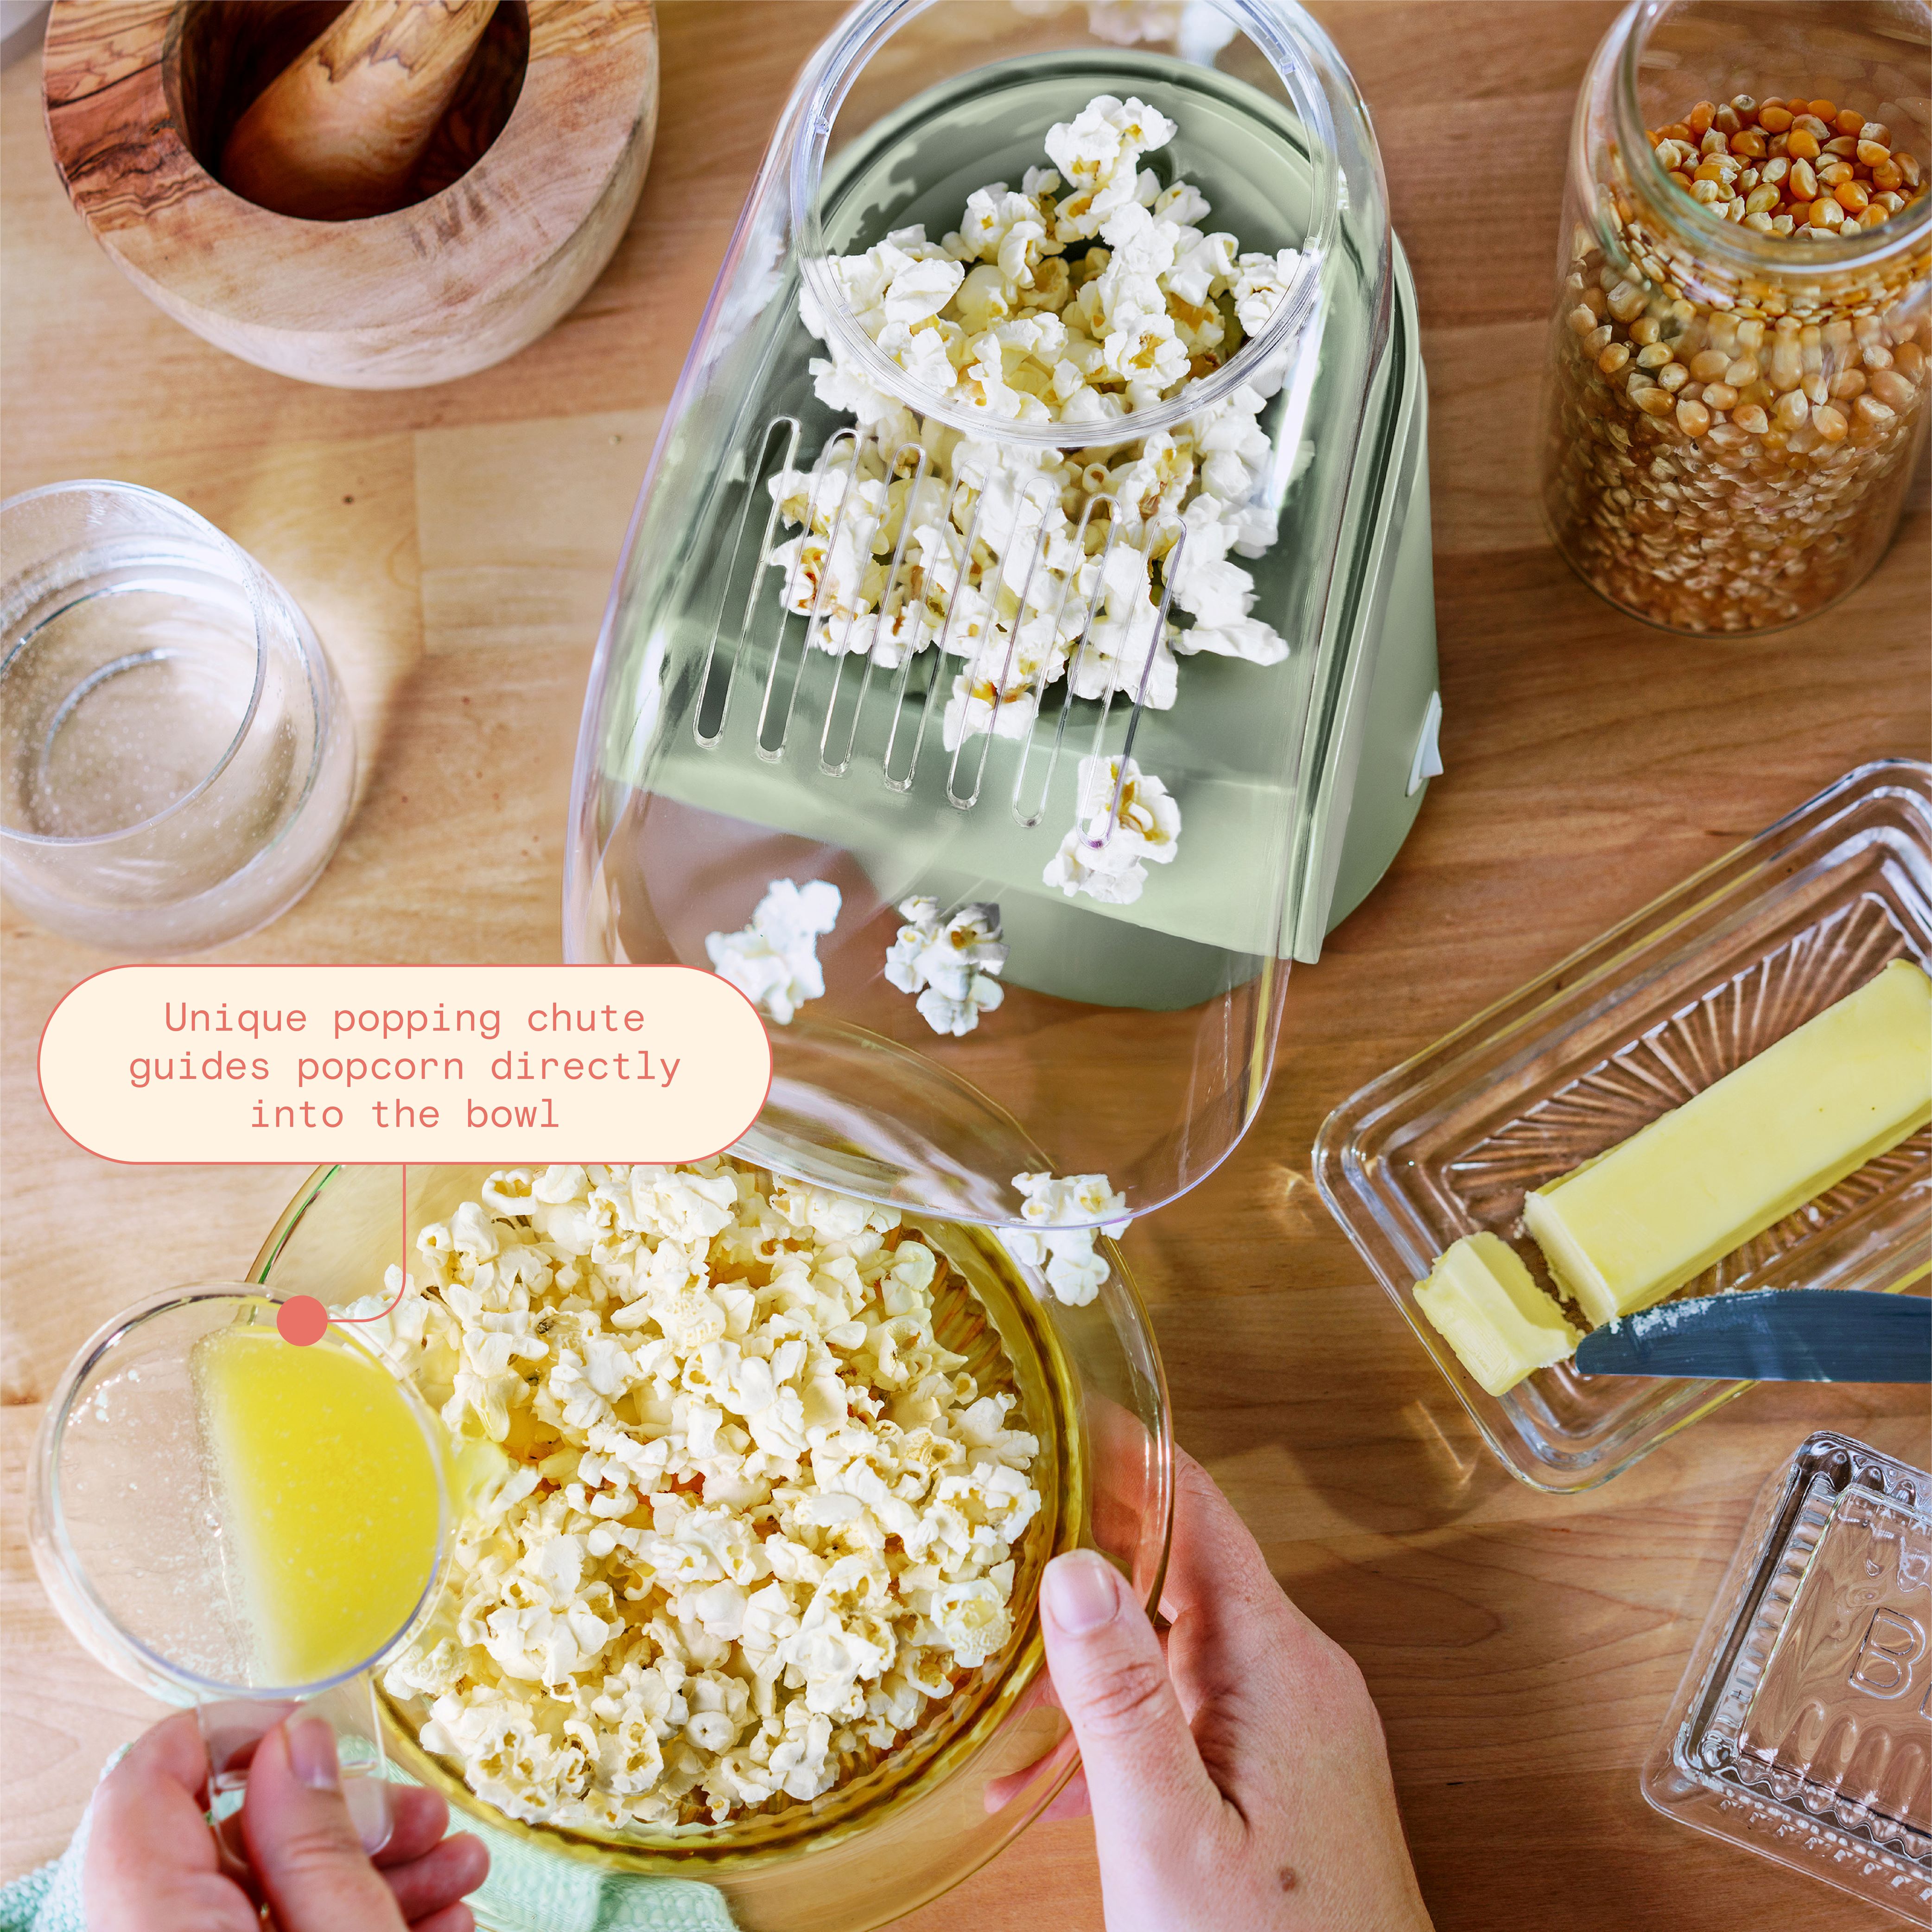 Beautiful 16 Cup Hot Air Electric Popcorn Maker, Sage Green by Drew Barrymore - image 7 of 13